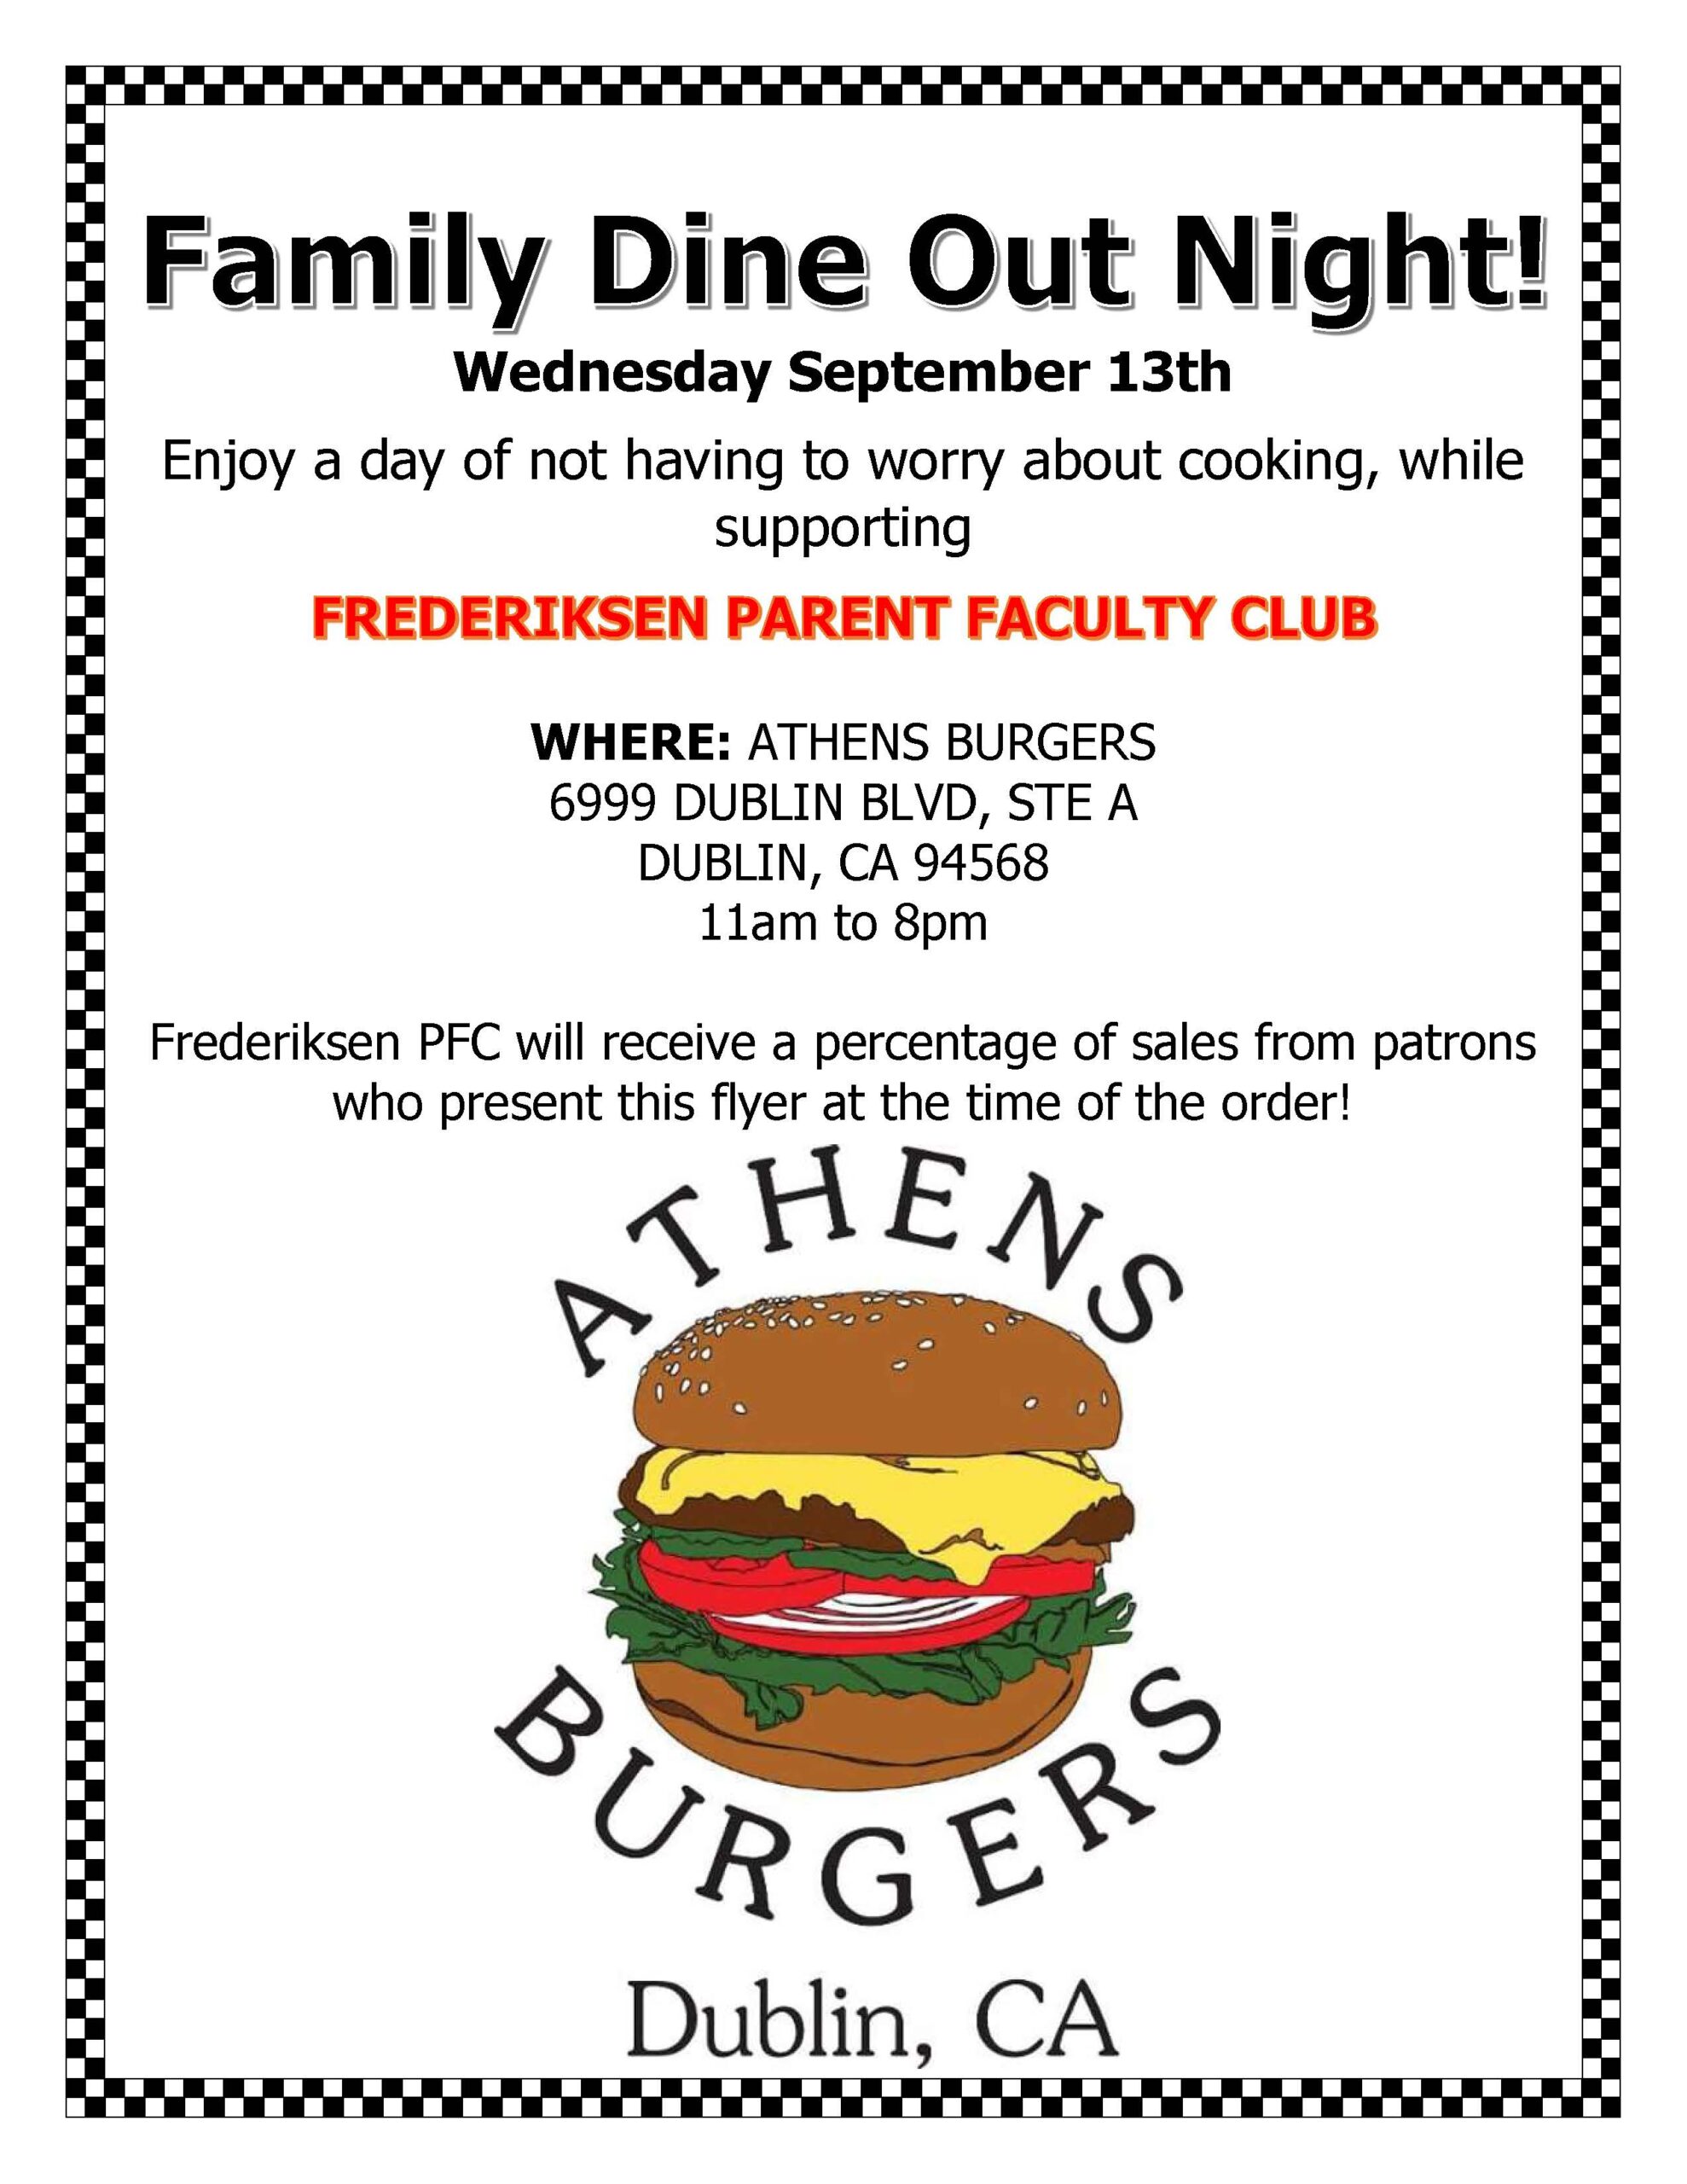 Athens Dine Out! September 13th 11am-8pm